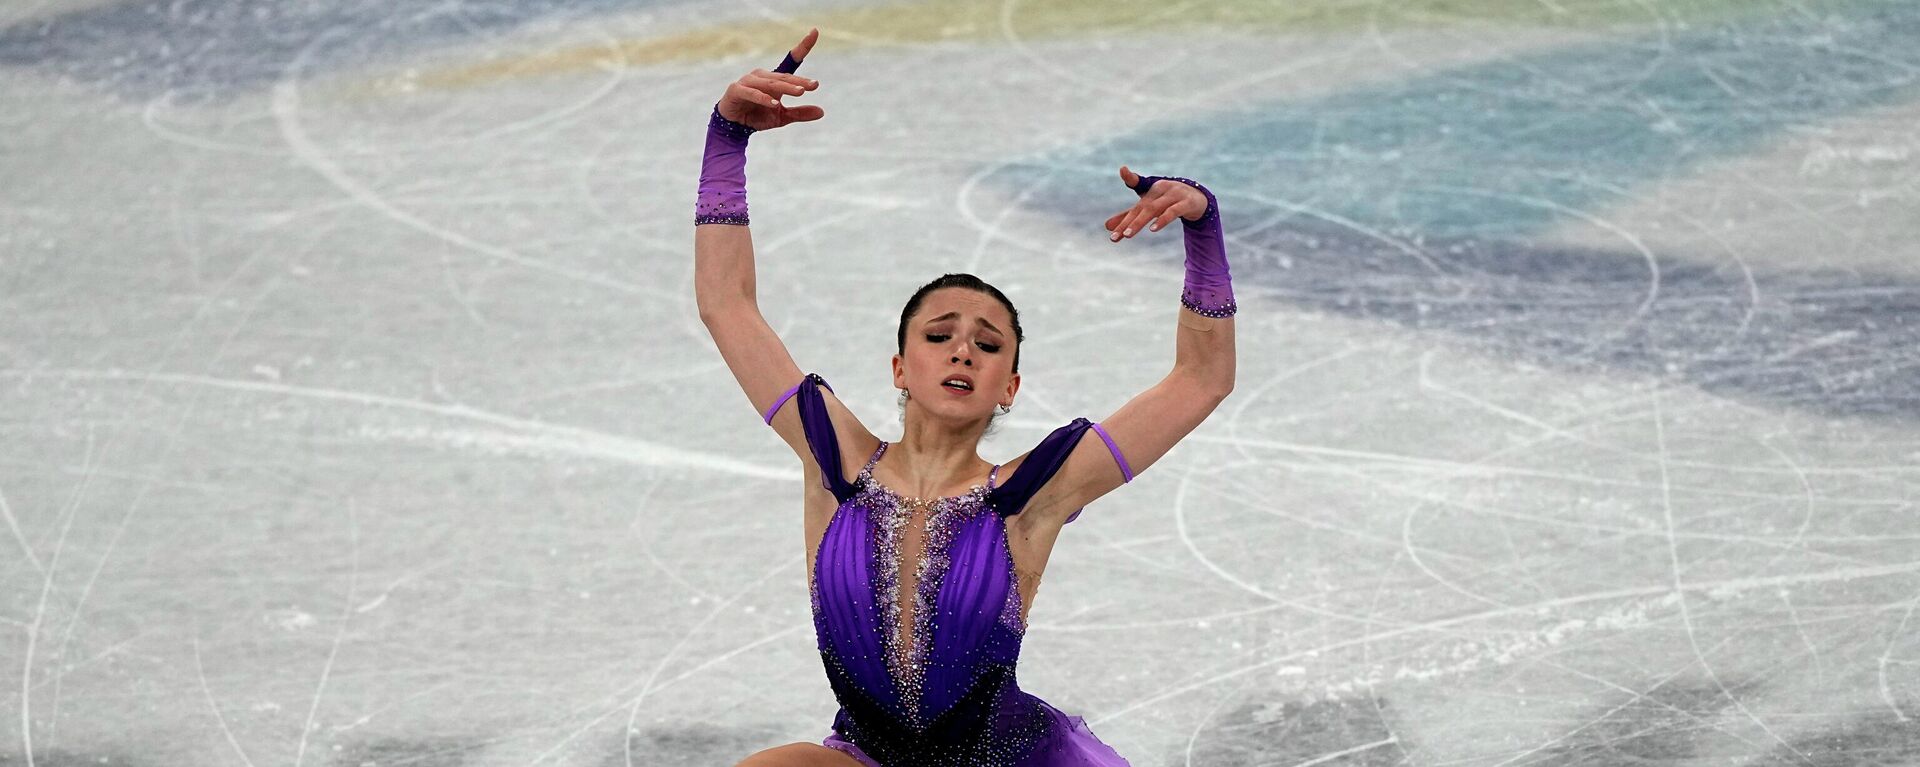 Kamila Valieva, of the Russian Olympic Committee, competes in the women's short program team figure skating competition at the 2022 Winter Olympics, Sunday, Feb. 6, 2022, in Beijing. - Sputnik International, 1920, 11.02.2022